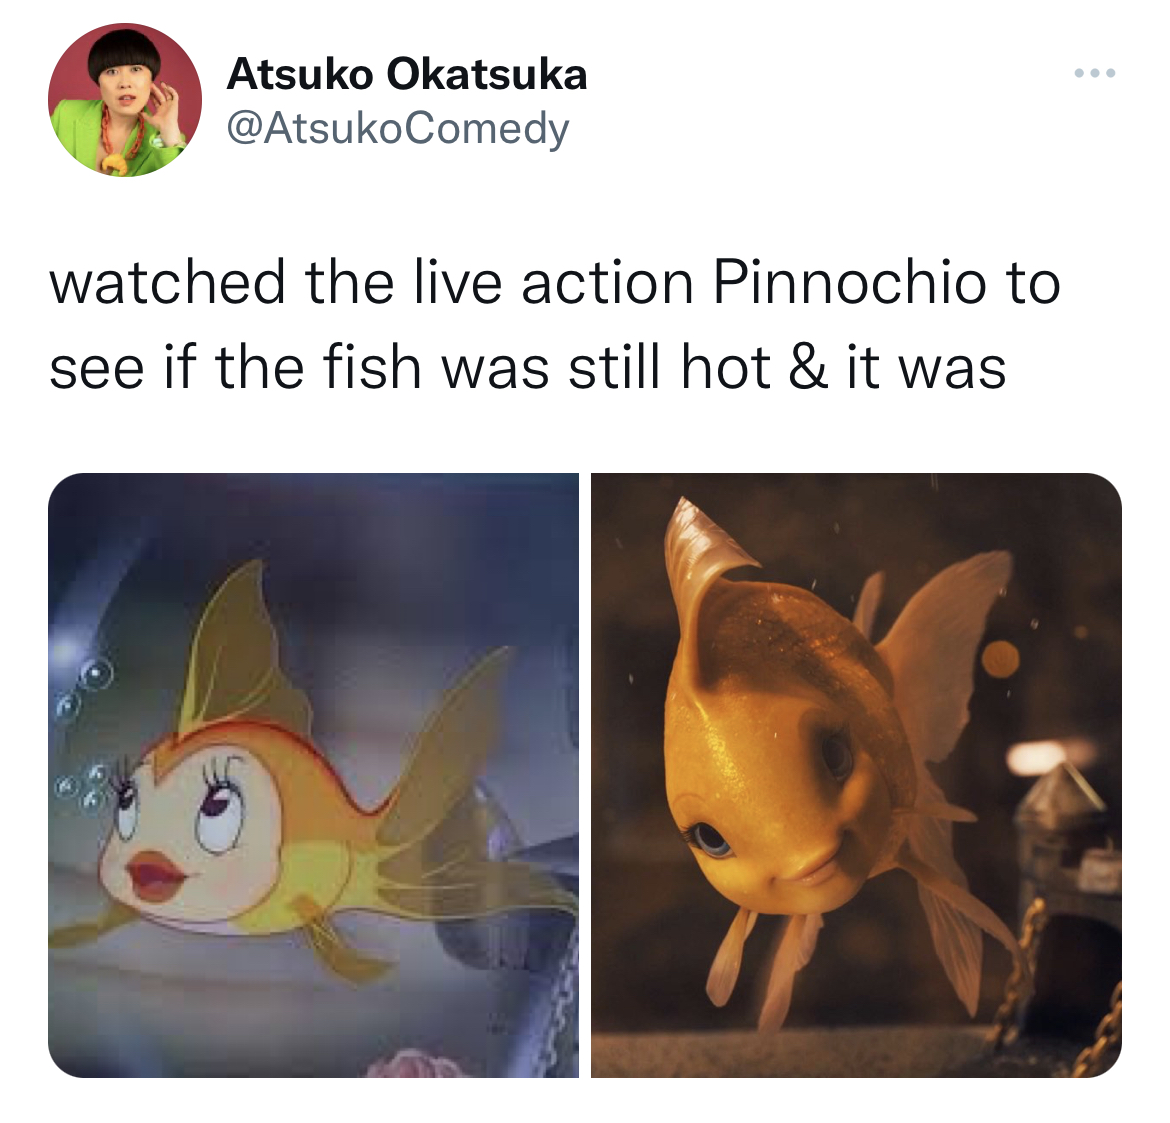 Fresh and funny tweets - fauna - Atsuko Okatsuka watched the live action Pinnochio to see if the fish was still hot & it was www